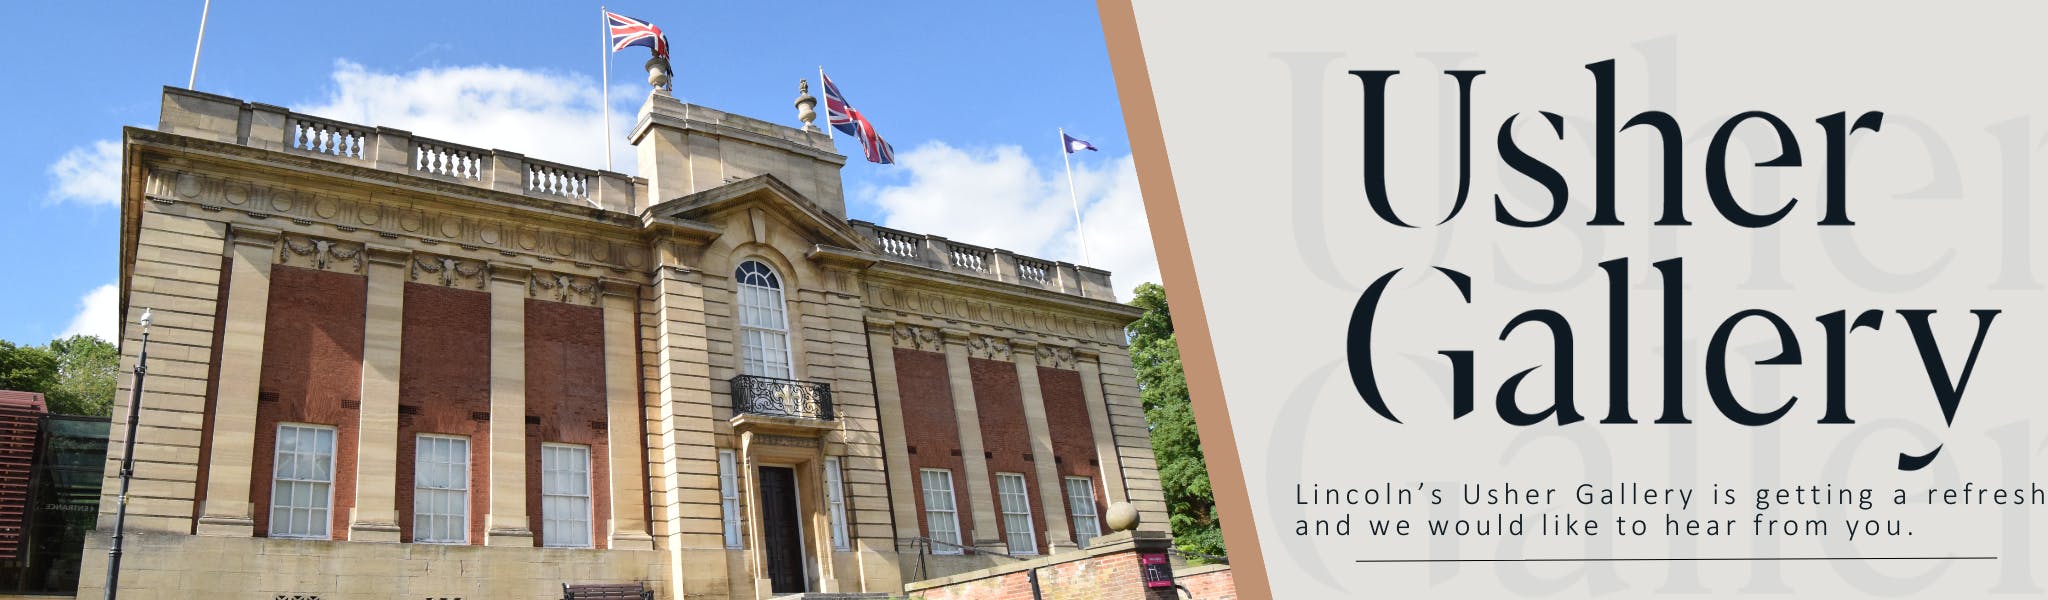 The Usher Gallery. Lincoln's art gallery is getting a refresh and we would like to hear from you.